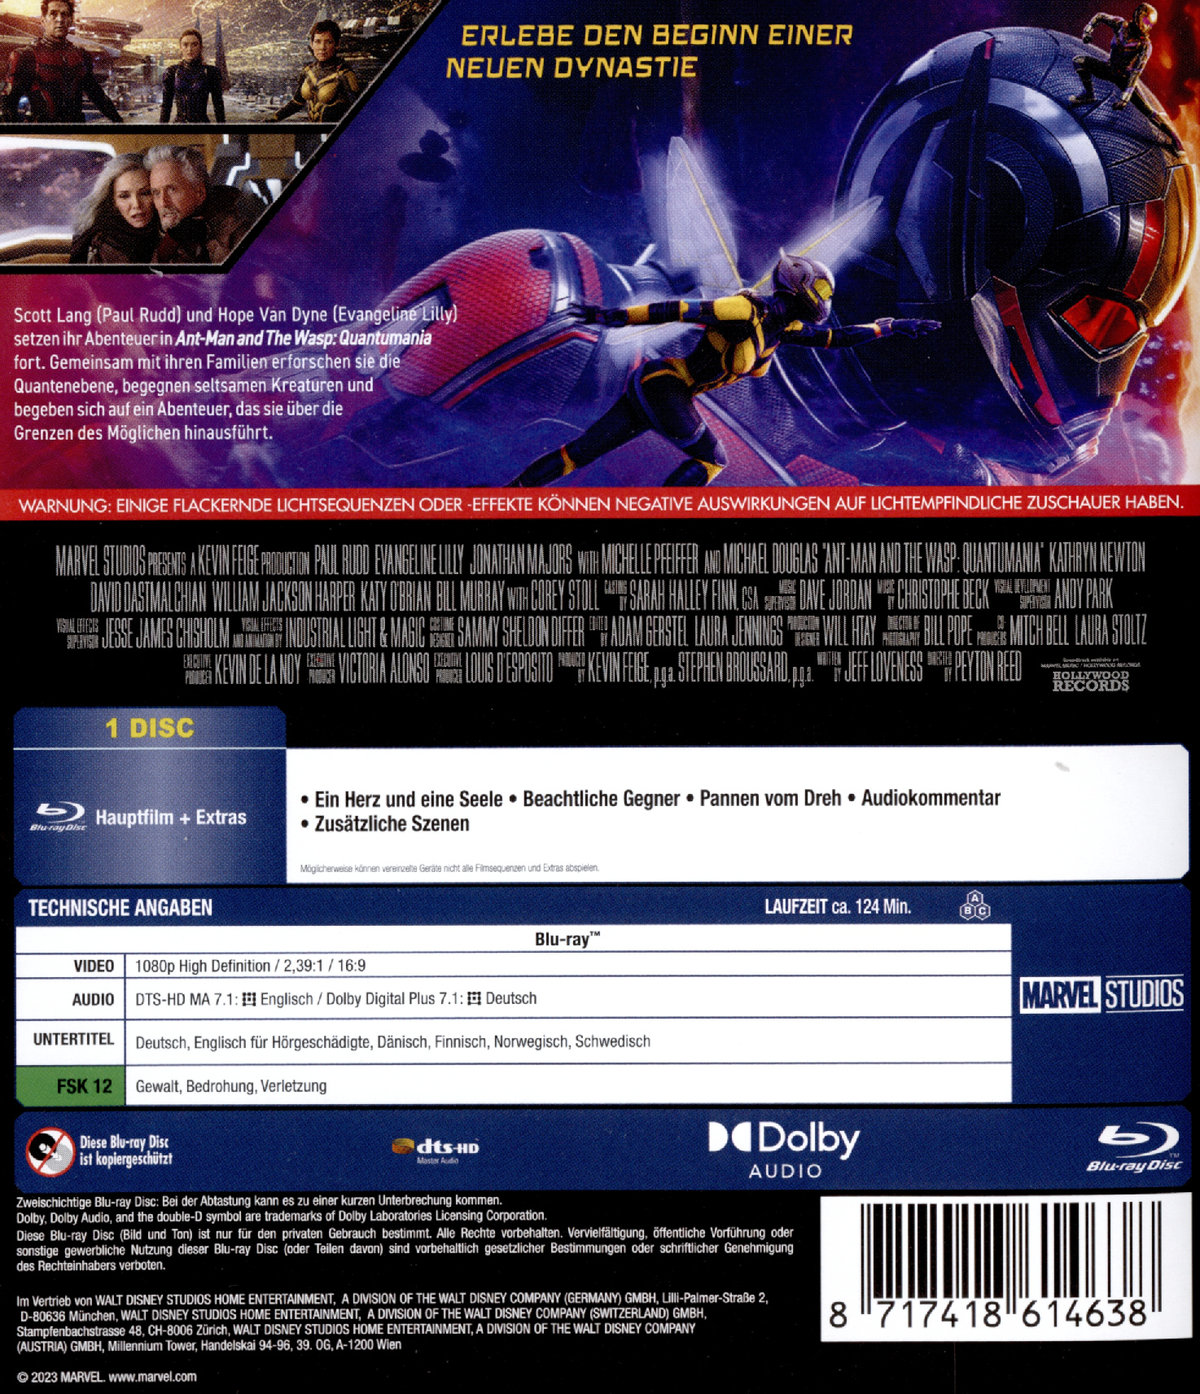 Ant-Man and the Wasp - Quantumania  (Blu-ray Disc)